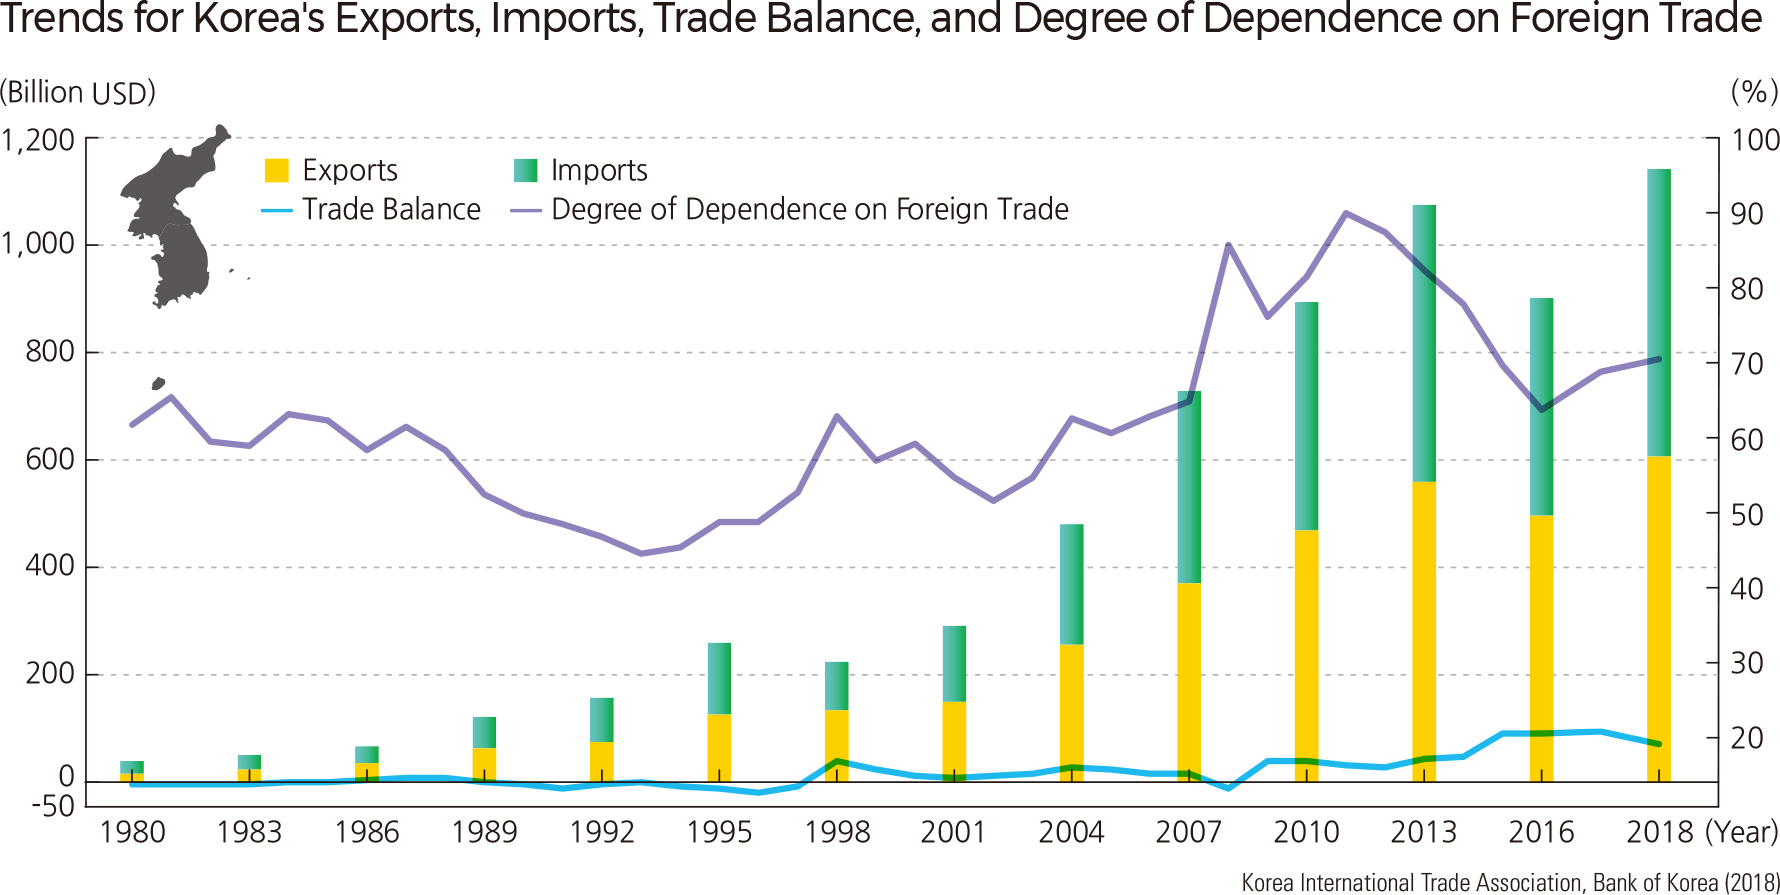 Trends for Korea's Exports, Imports, Trade Balance, and Degree of Dependence on Foreign Trade